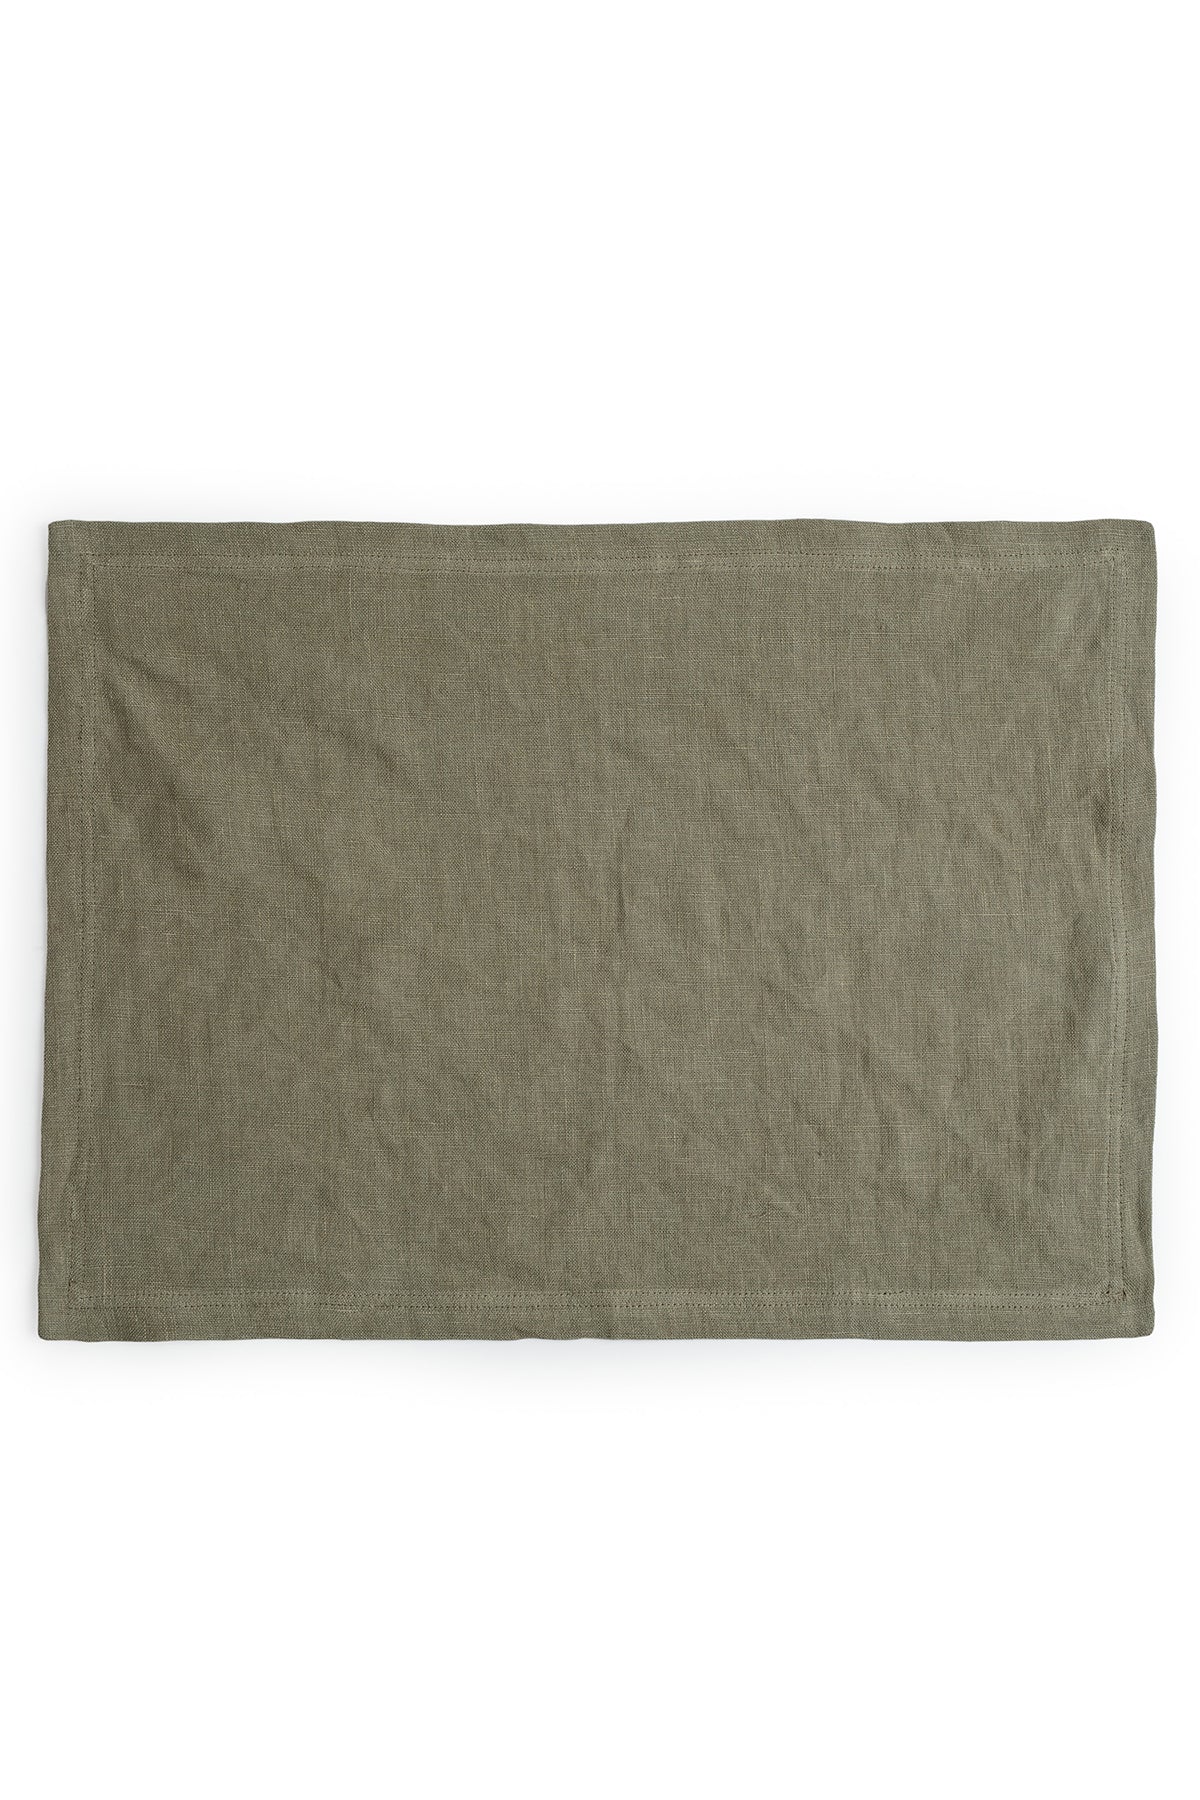   A plain green dyed Jenny Graham Home linen placemat displayed on a white background. 